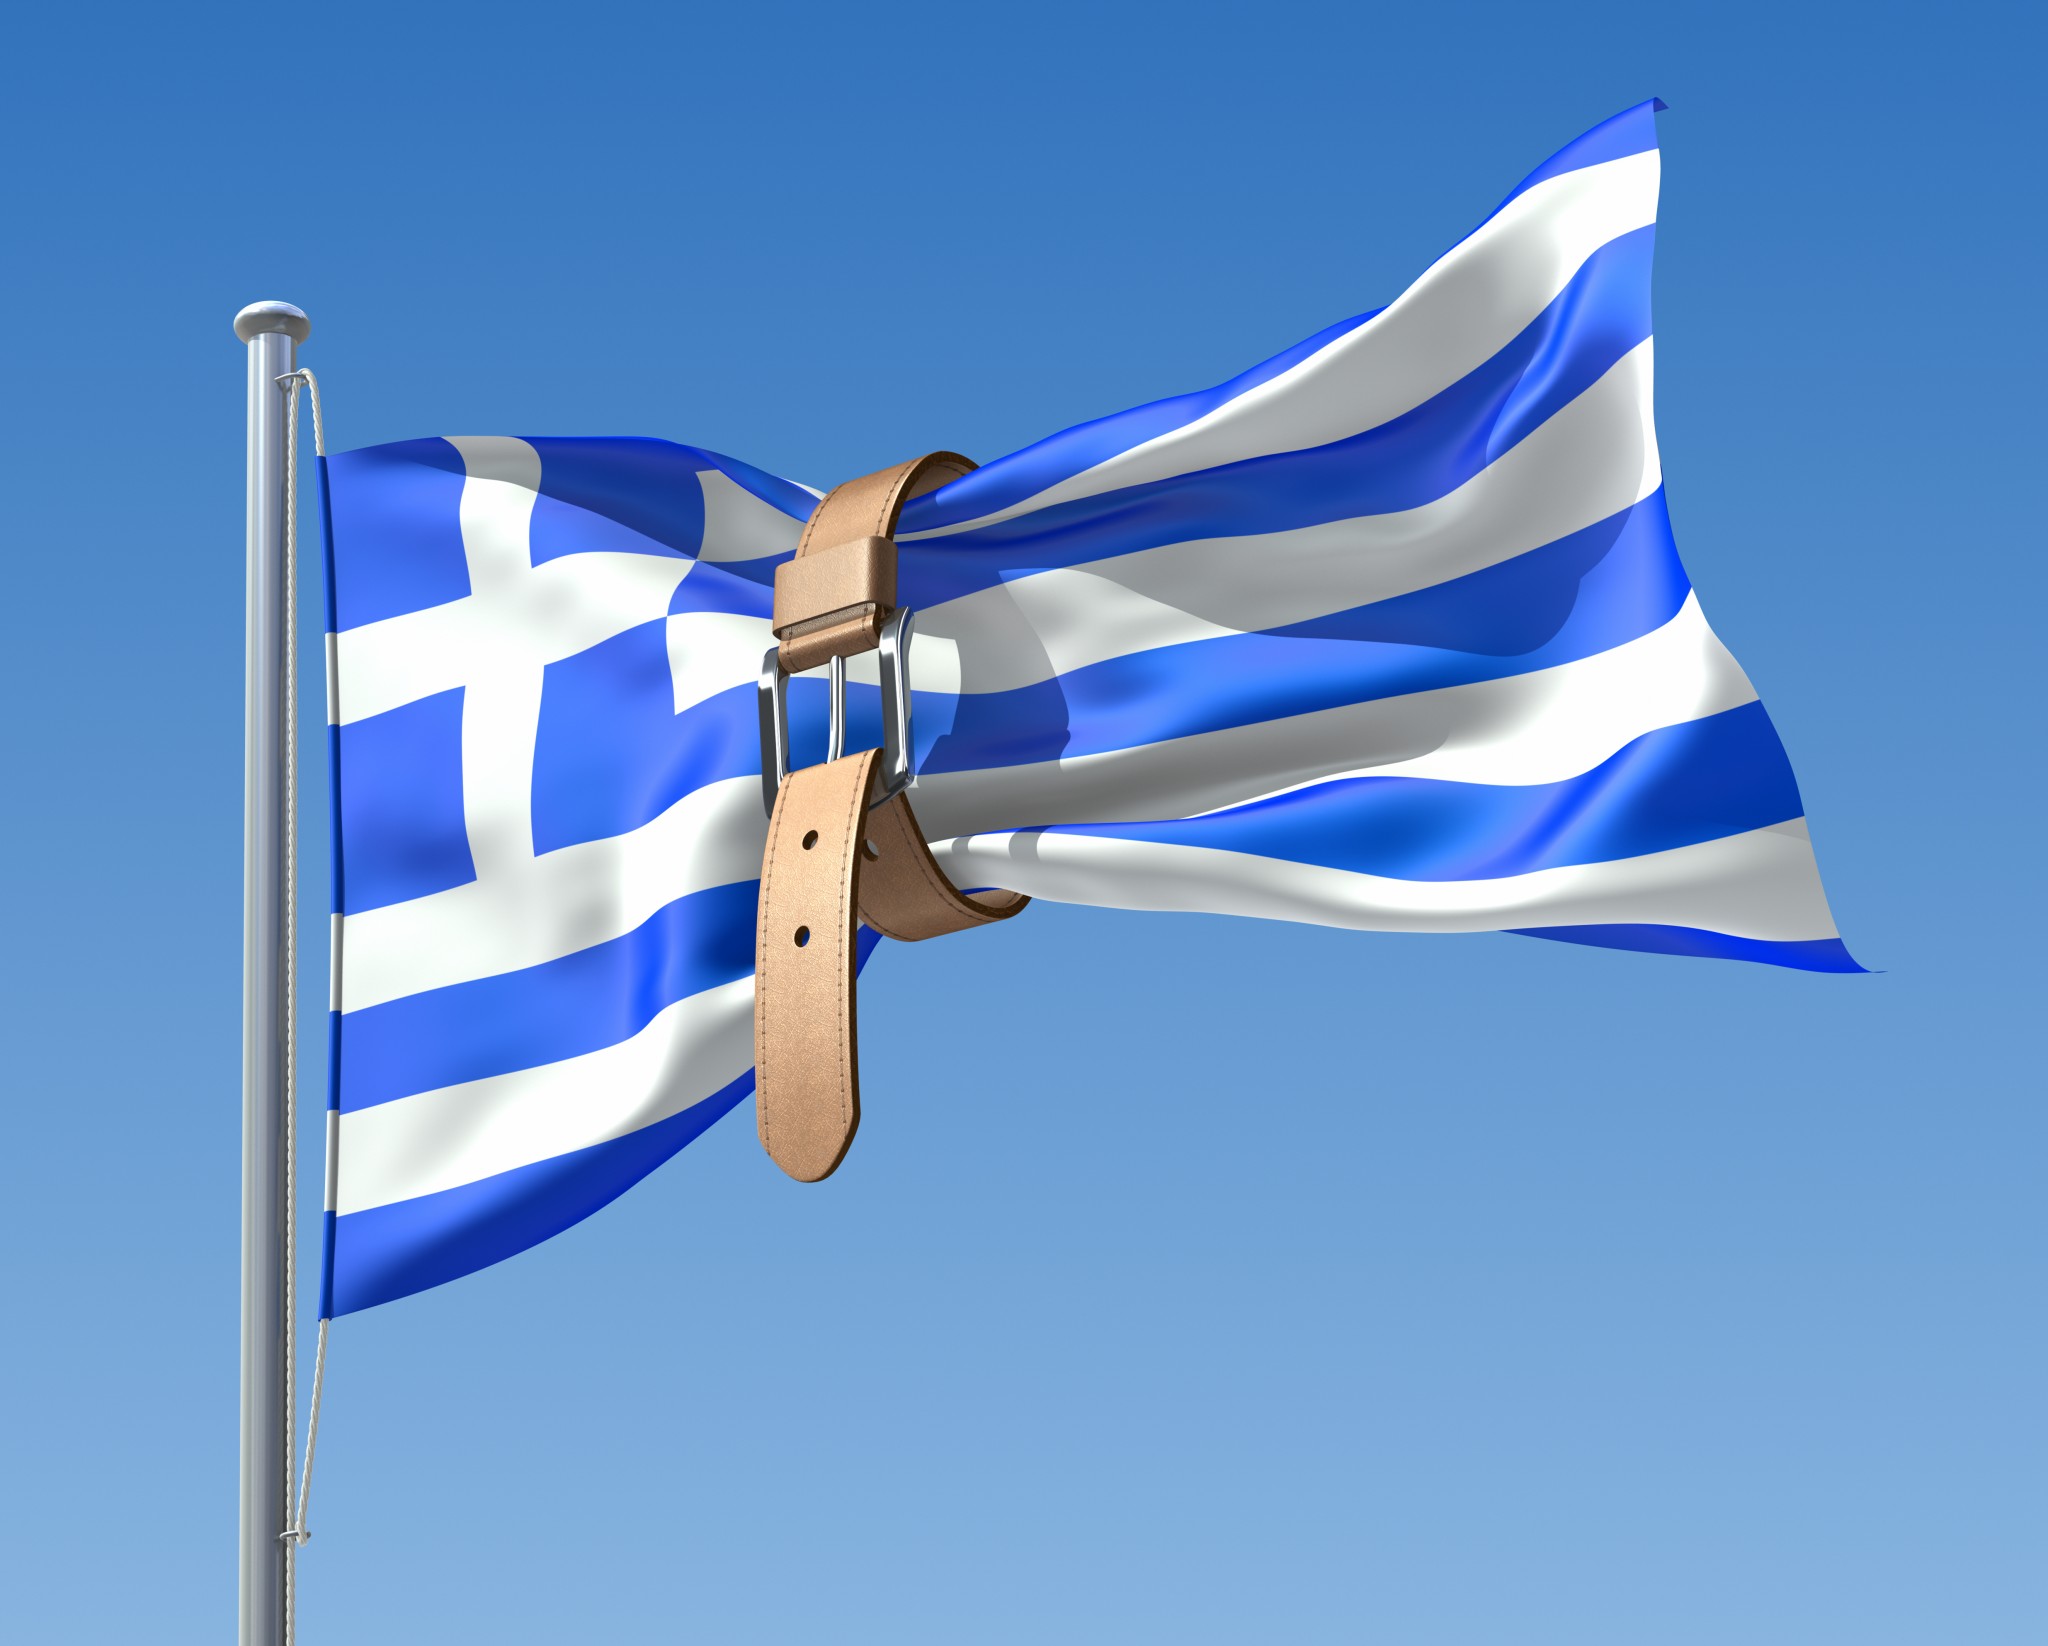 With factions in Greece resisting further austerity, a sovereign debt problem could resurface.